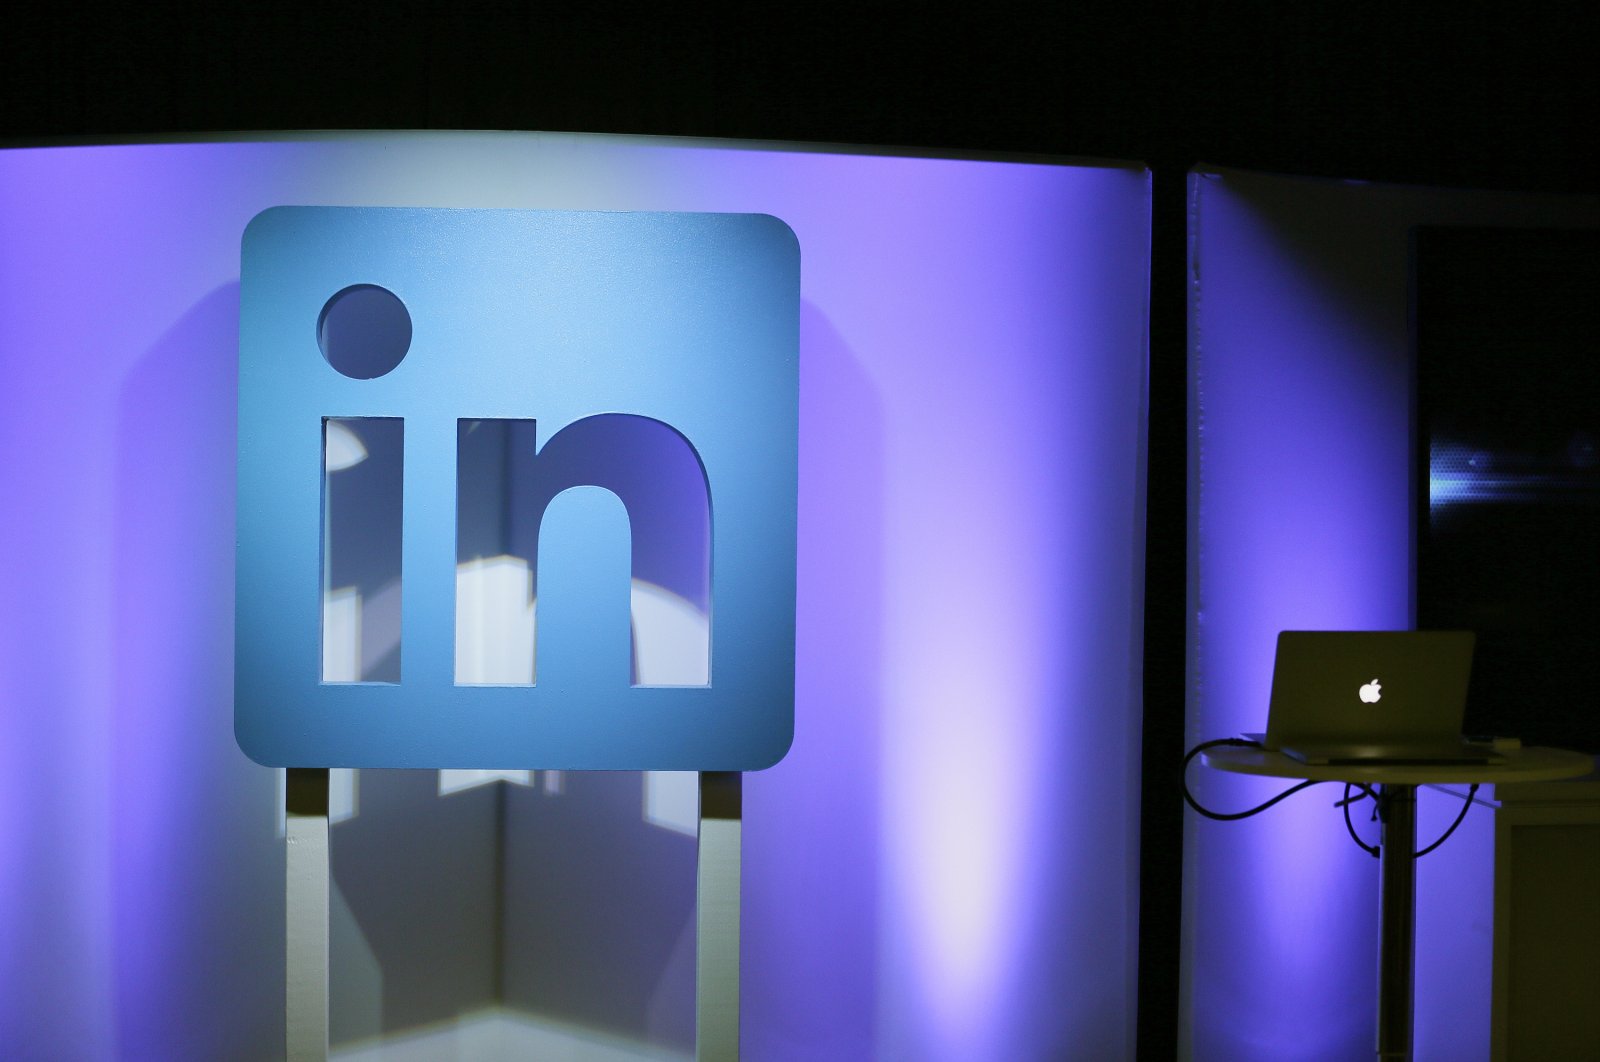 The LinkedIn logo is displayed during a product announcement in San Francisco, U.S., Sept. 22, 2016. (AP Photo)